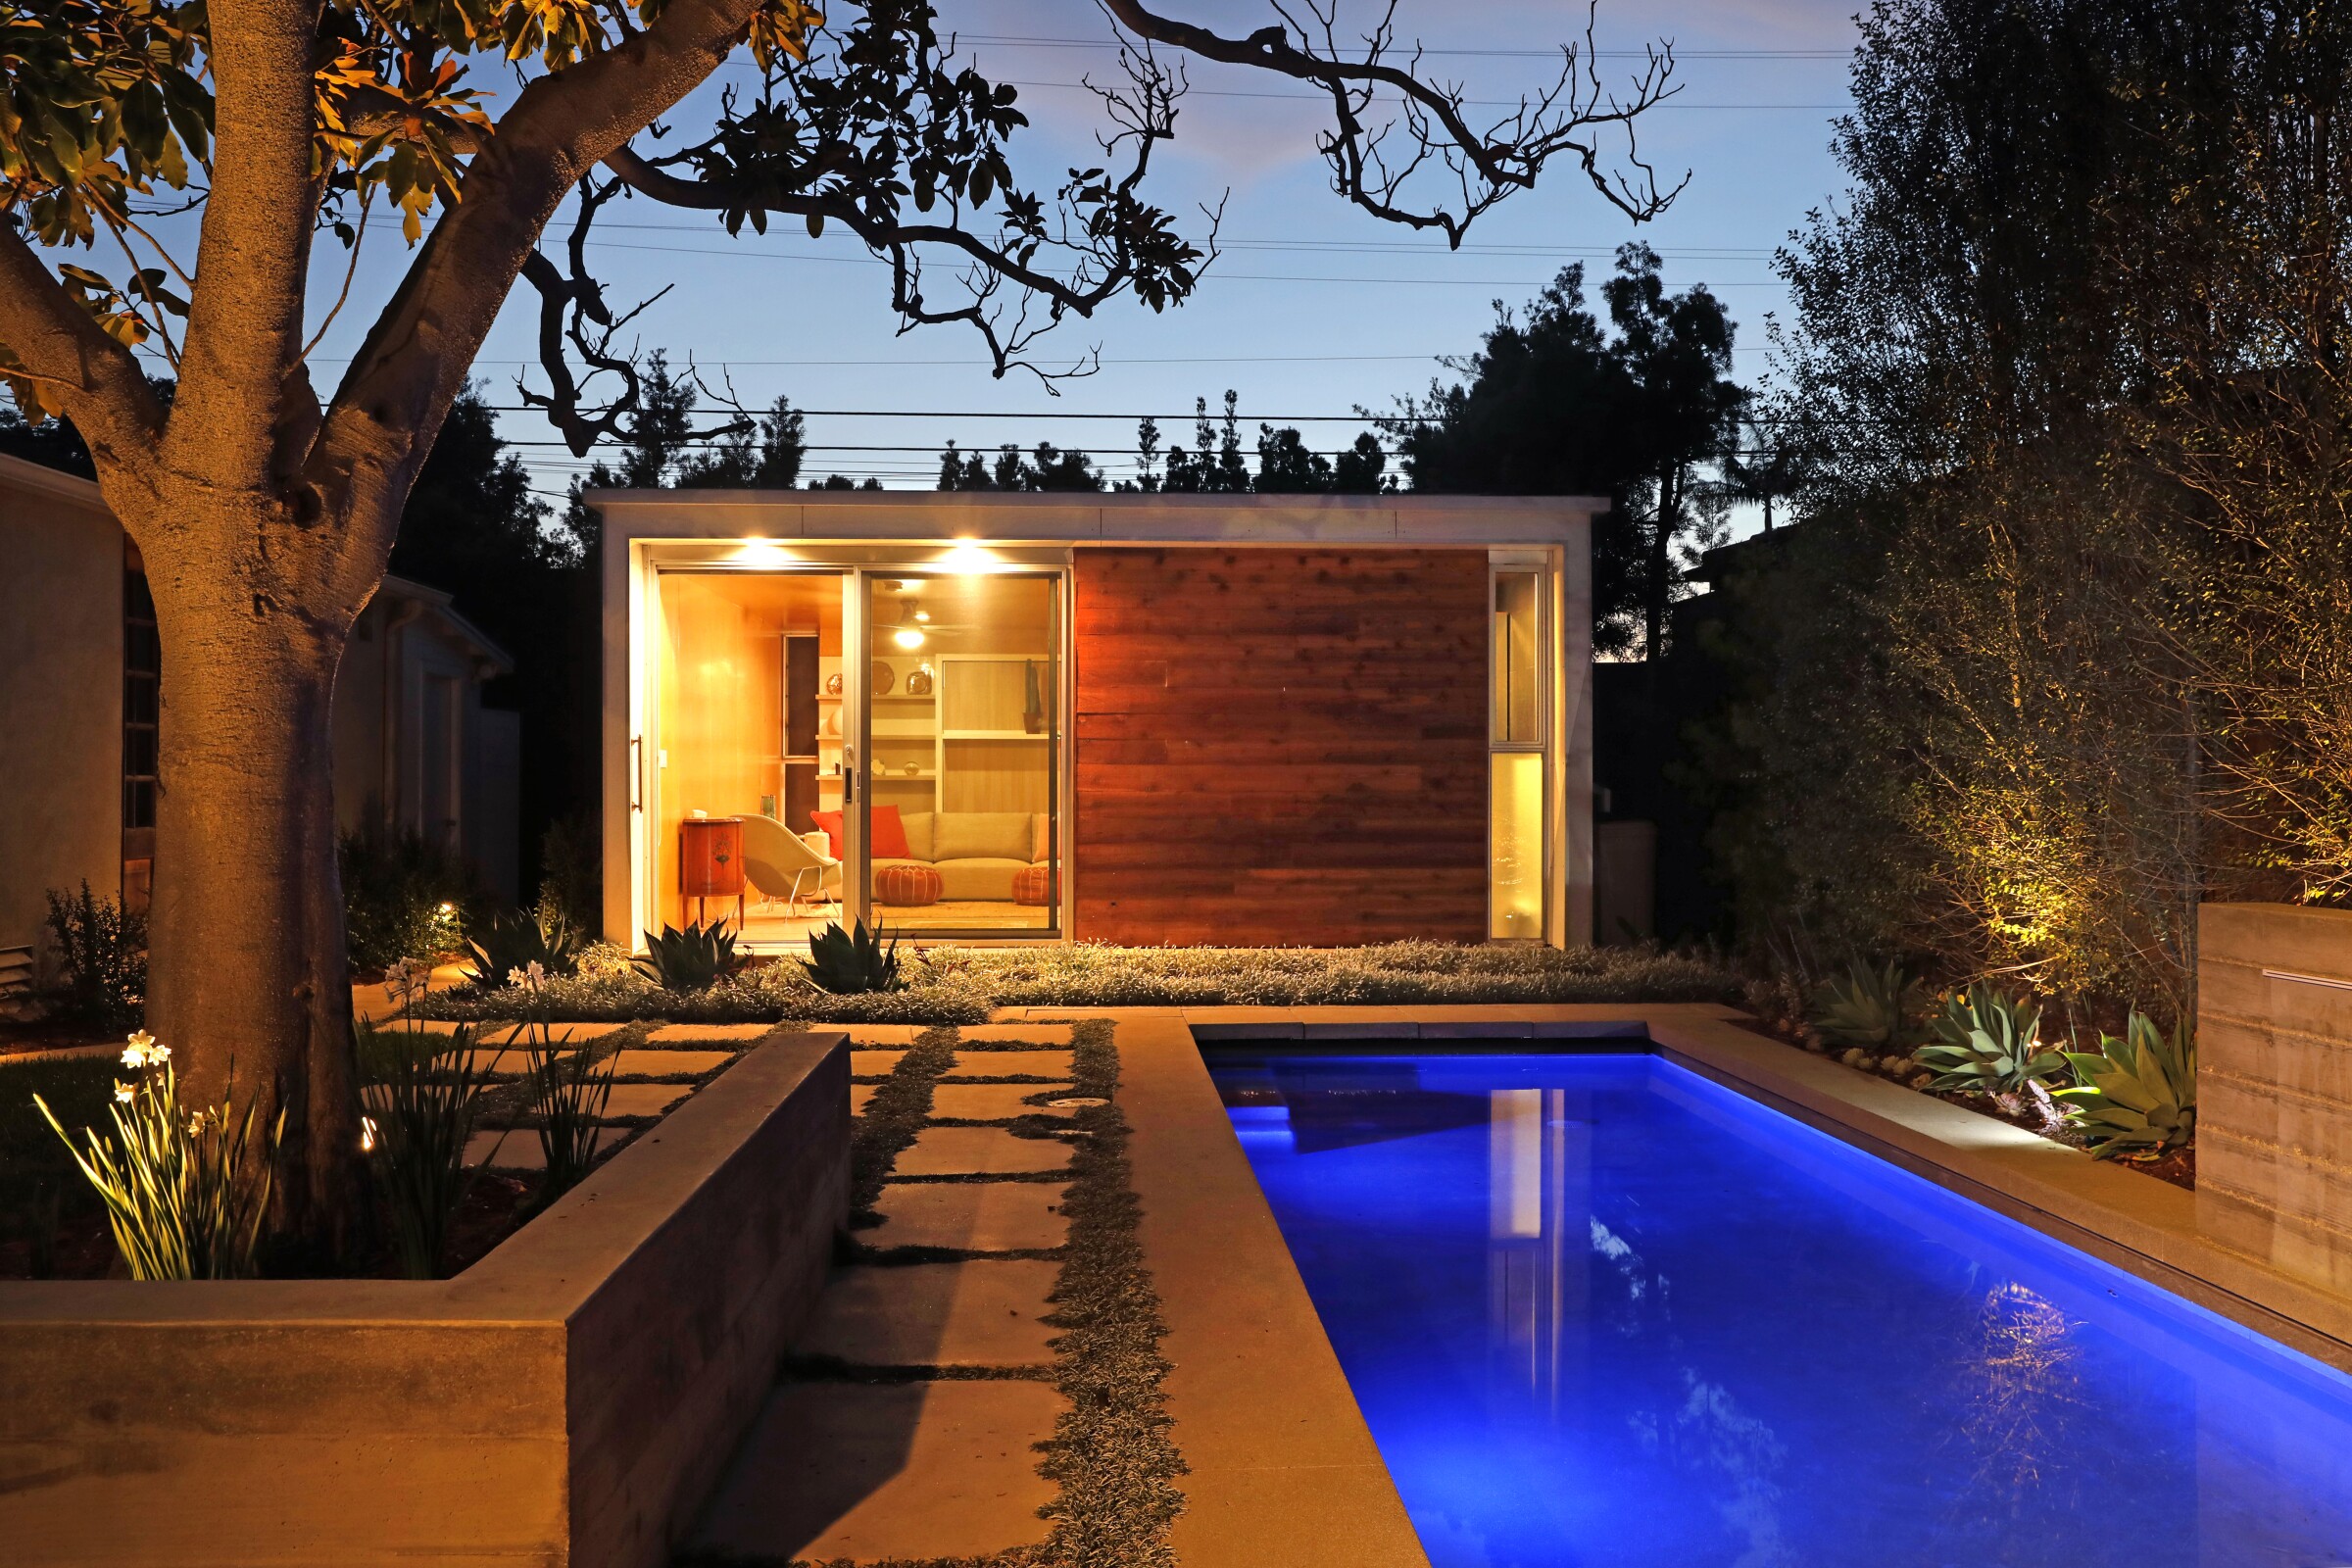 At dusk, a tiny ADU sits in a backyard, just beyond an illuminated lap pool.